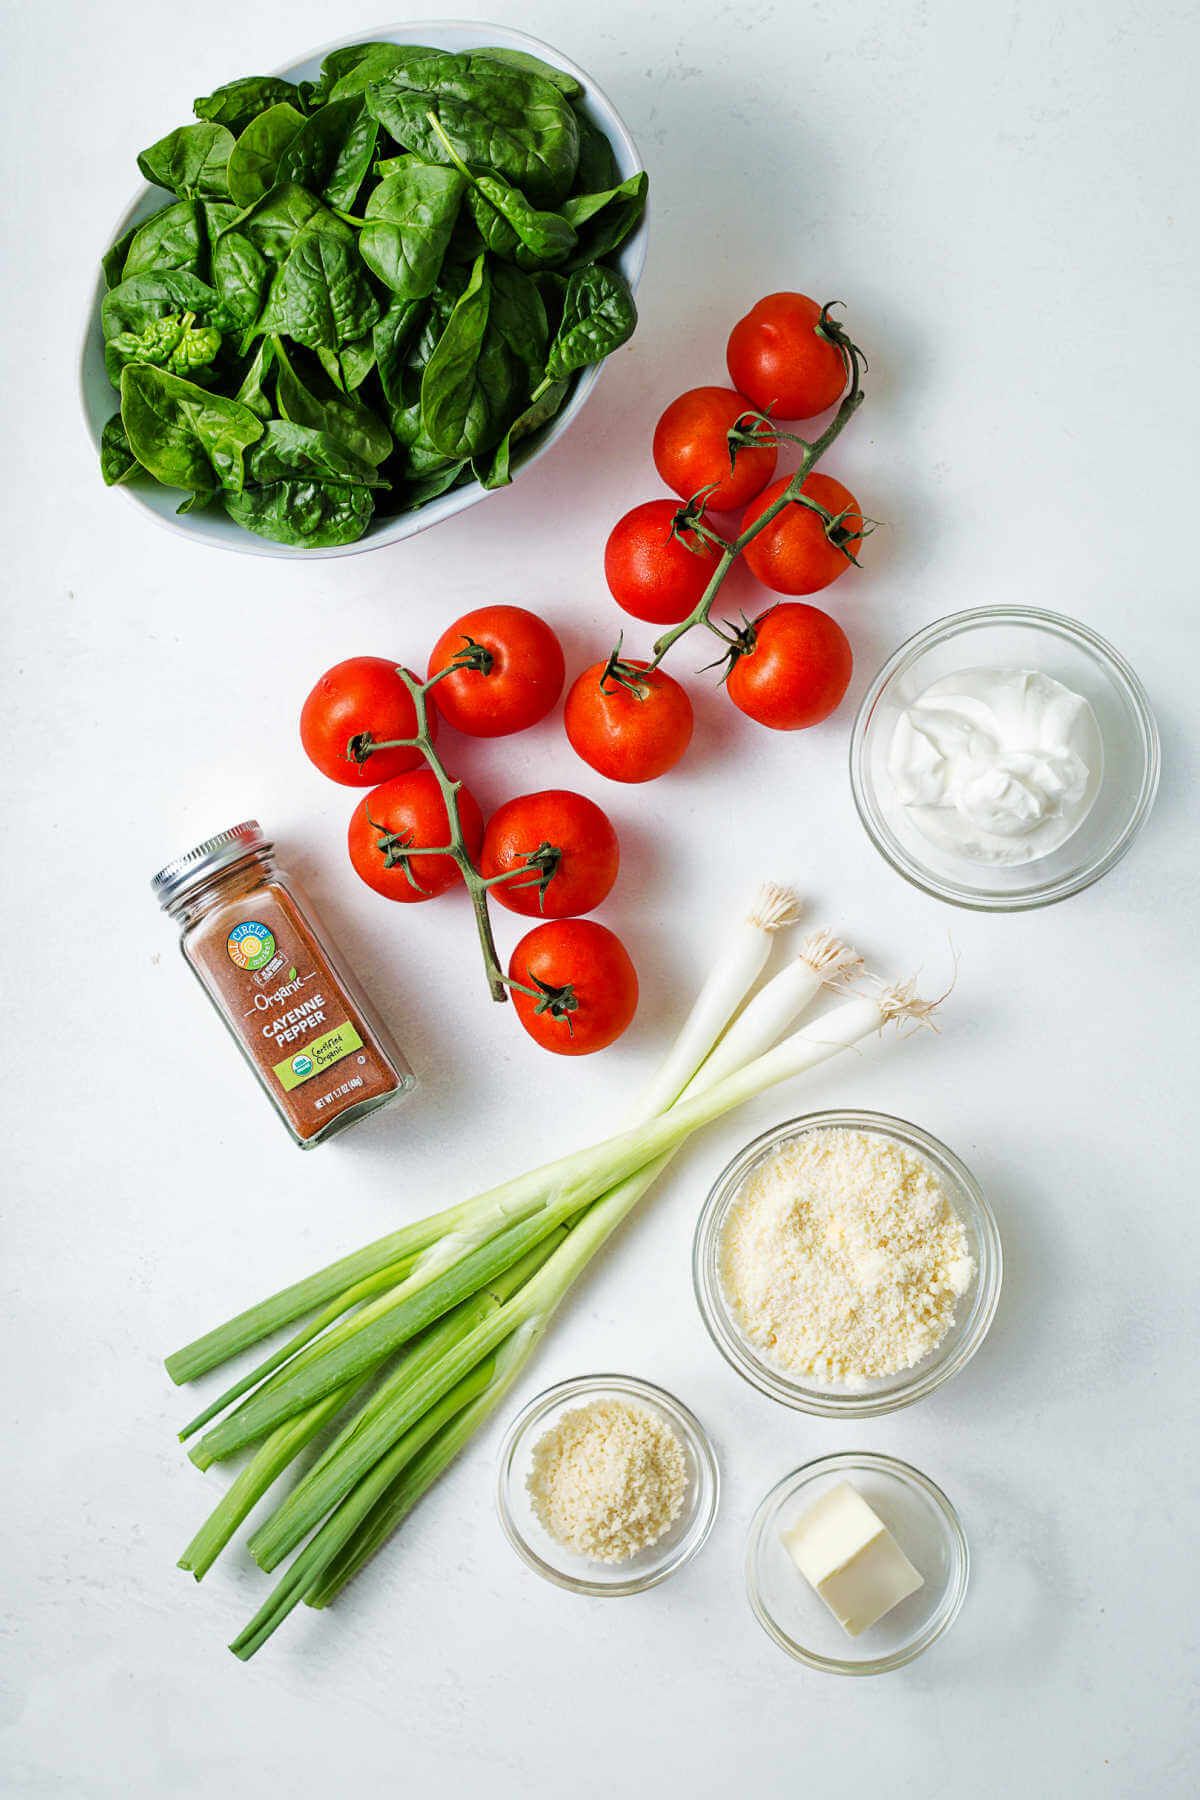 ingredients for spinach stuffed baked tomatoes on a table.